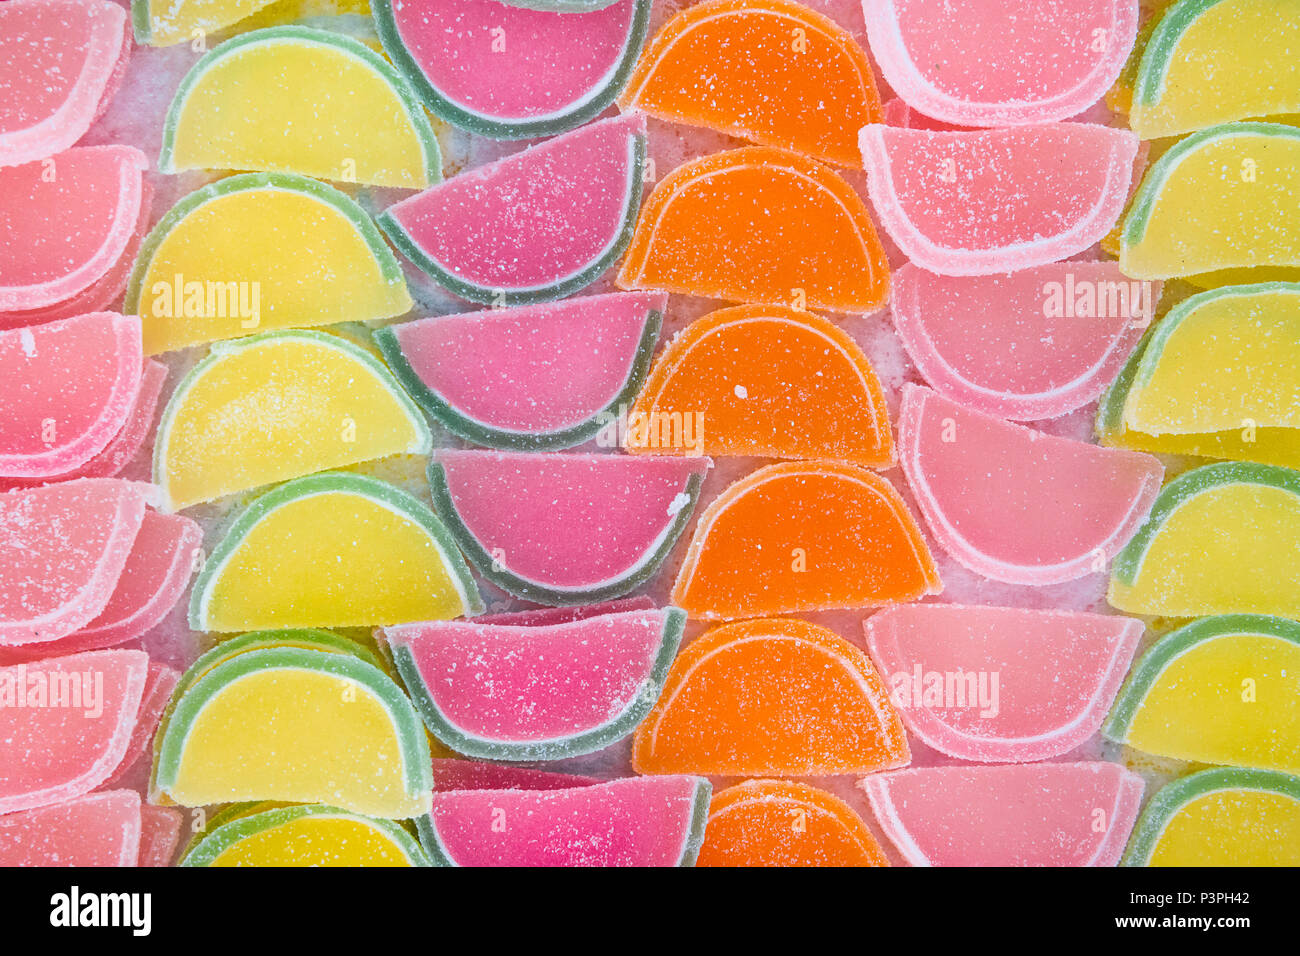 Jelly Marmalade Candies of Various Colors in Shape of Citrus Fruits Watermelon Wedges. Vivid Multicolored Palette Orange Yellow Green Red Pink. Patter Stock Photo